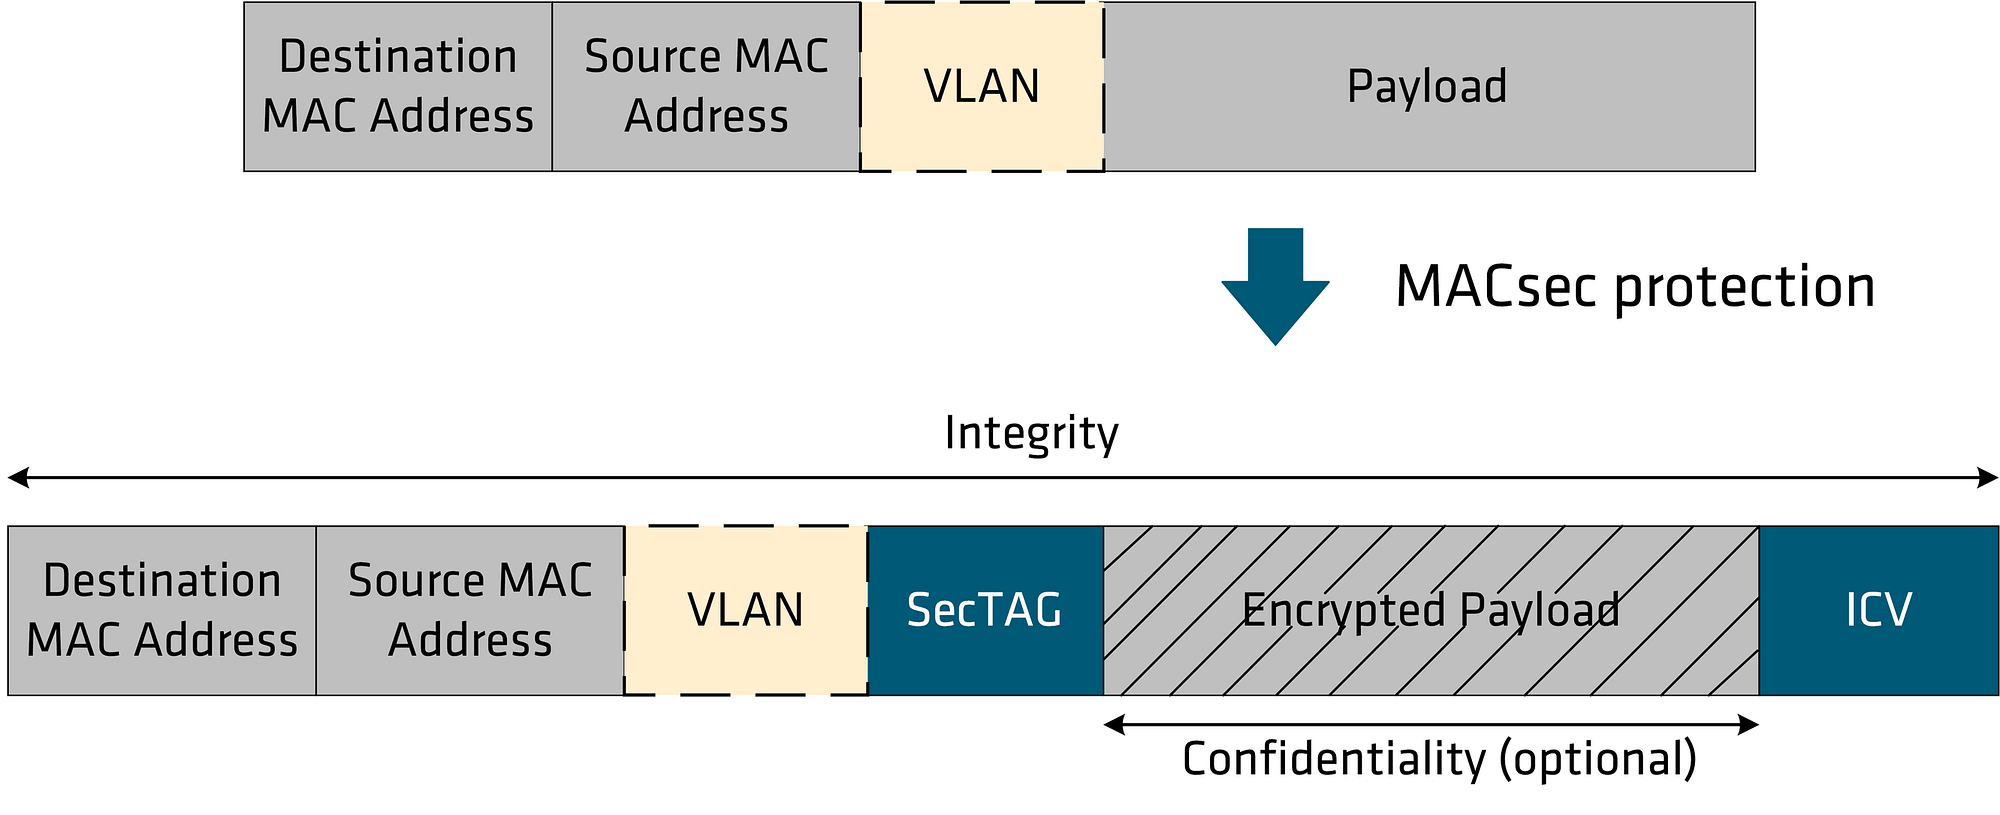 What is MACsec